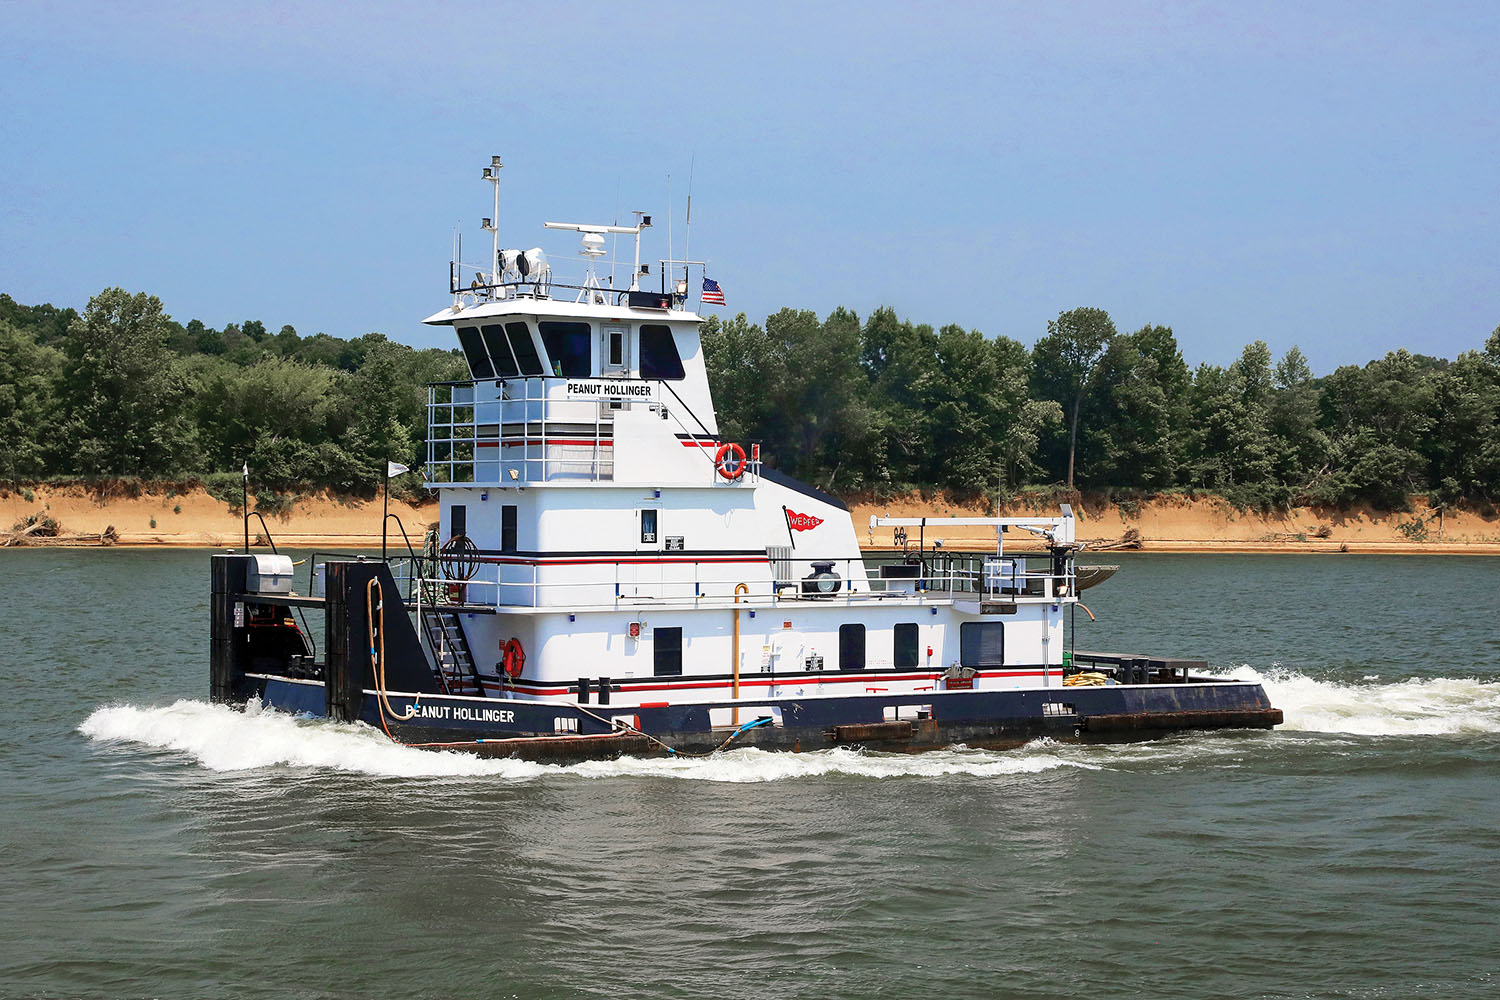 Built in 1981 as the Miss Eddie Dell, the mv. Peanut Hollinger is powered by Cummins KTA38 engines. (Photo by Jeff L. Yates)